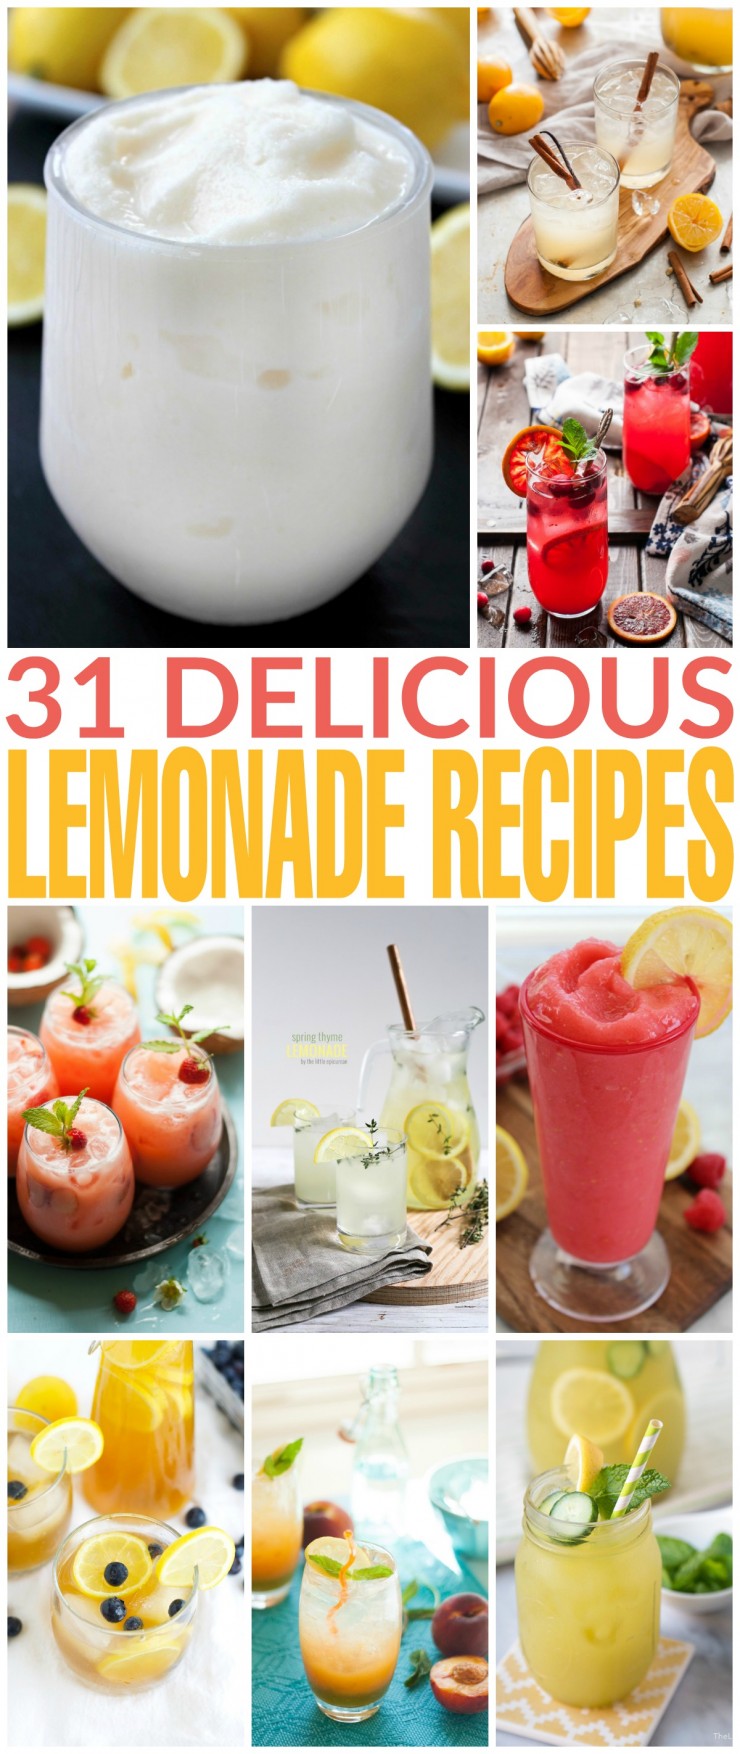 31 delicious lemonade recipes perfect for cooling down from the summer heat with. There is nothing like a cool drink of lemonade!